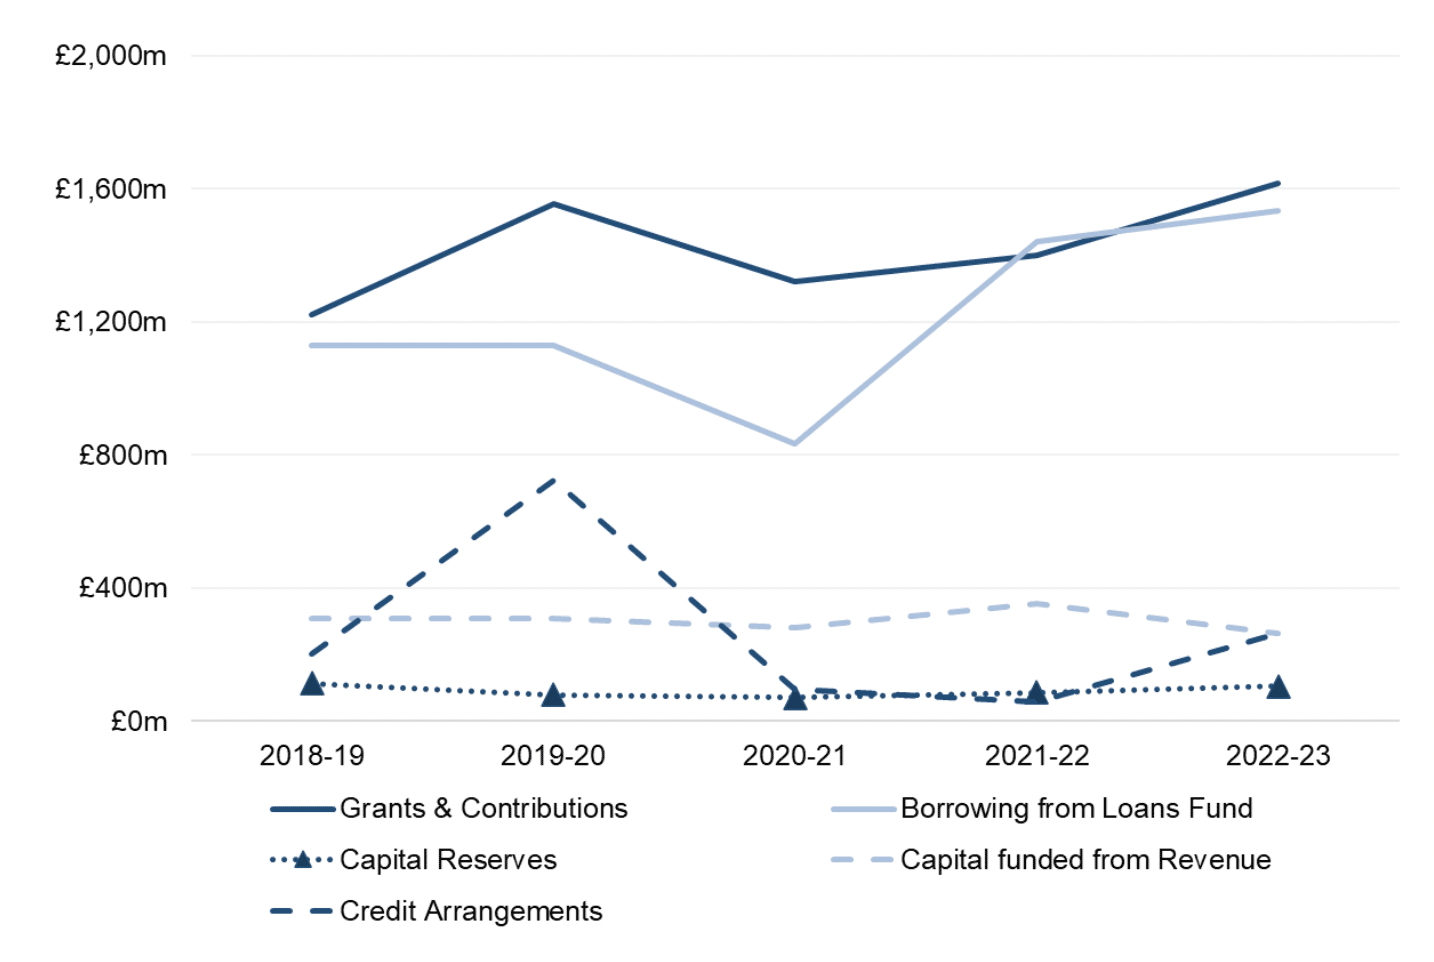 Line chart shows capital financing by type from 2018-19 to 2022-23. Except for capital funded from revenue, all types of financing have increased between 2021-22 and 2022-23, reflecting the overall increase in capital expenditure incurred in 2022-23. Grants & contributions and Borrowing from the Loans Fund continue to be the main sources of capital financing.